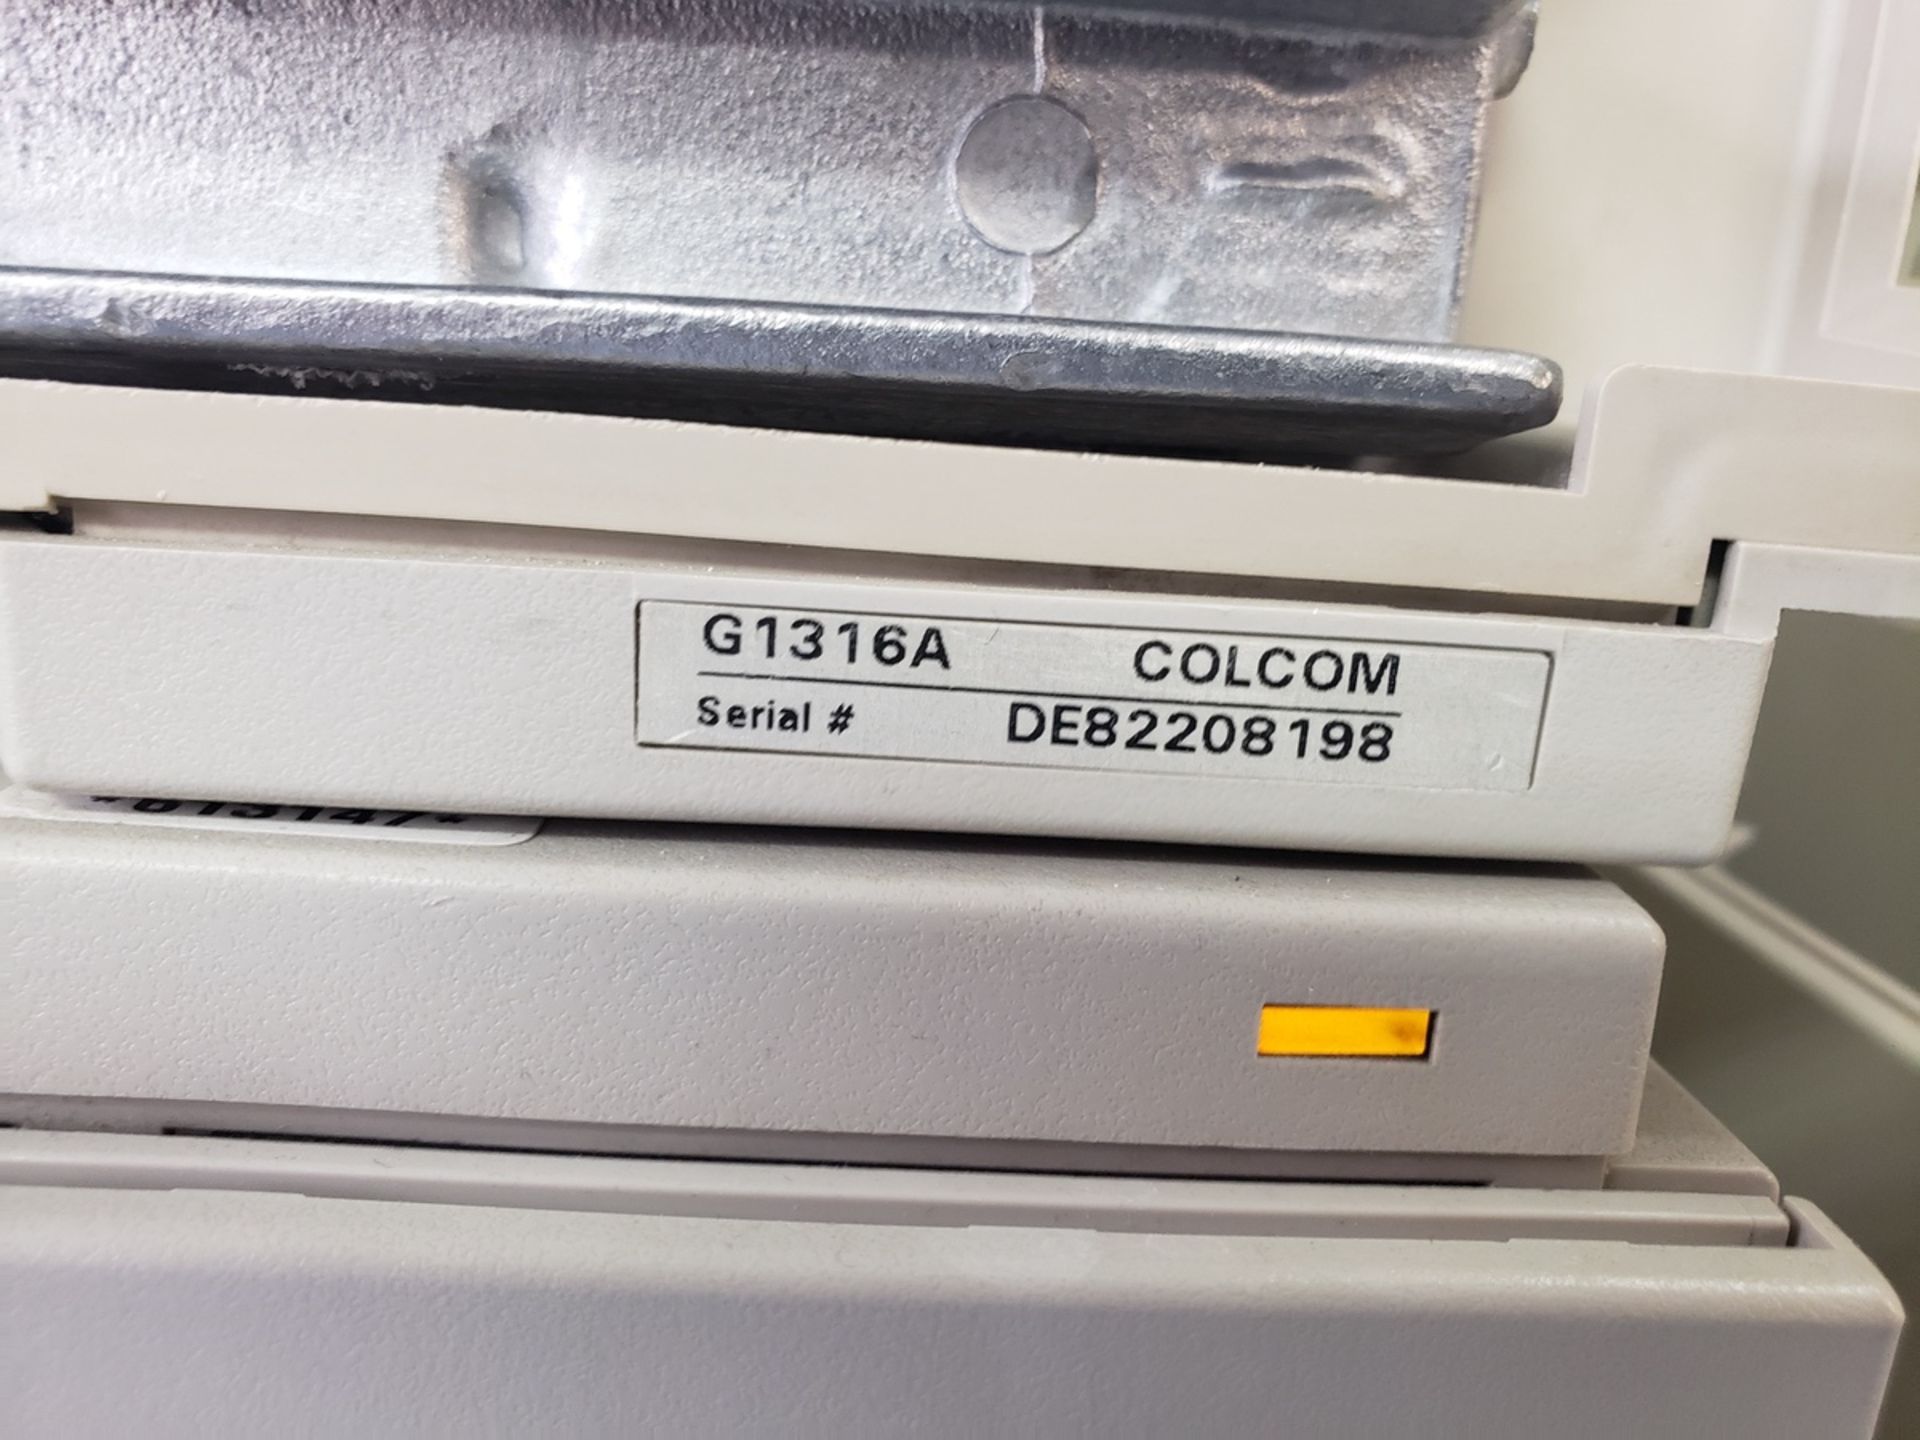 HP/Agilent HPLC System, HP DAD, M# G1315A, S/N DE90604674, HP COLCOM, M# G1316A, | Rig Fee $See Desc - Image 3 of 6